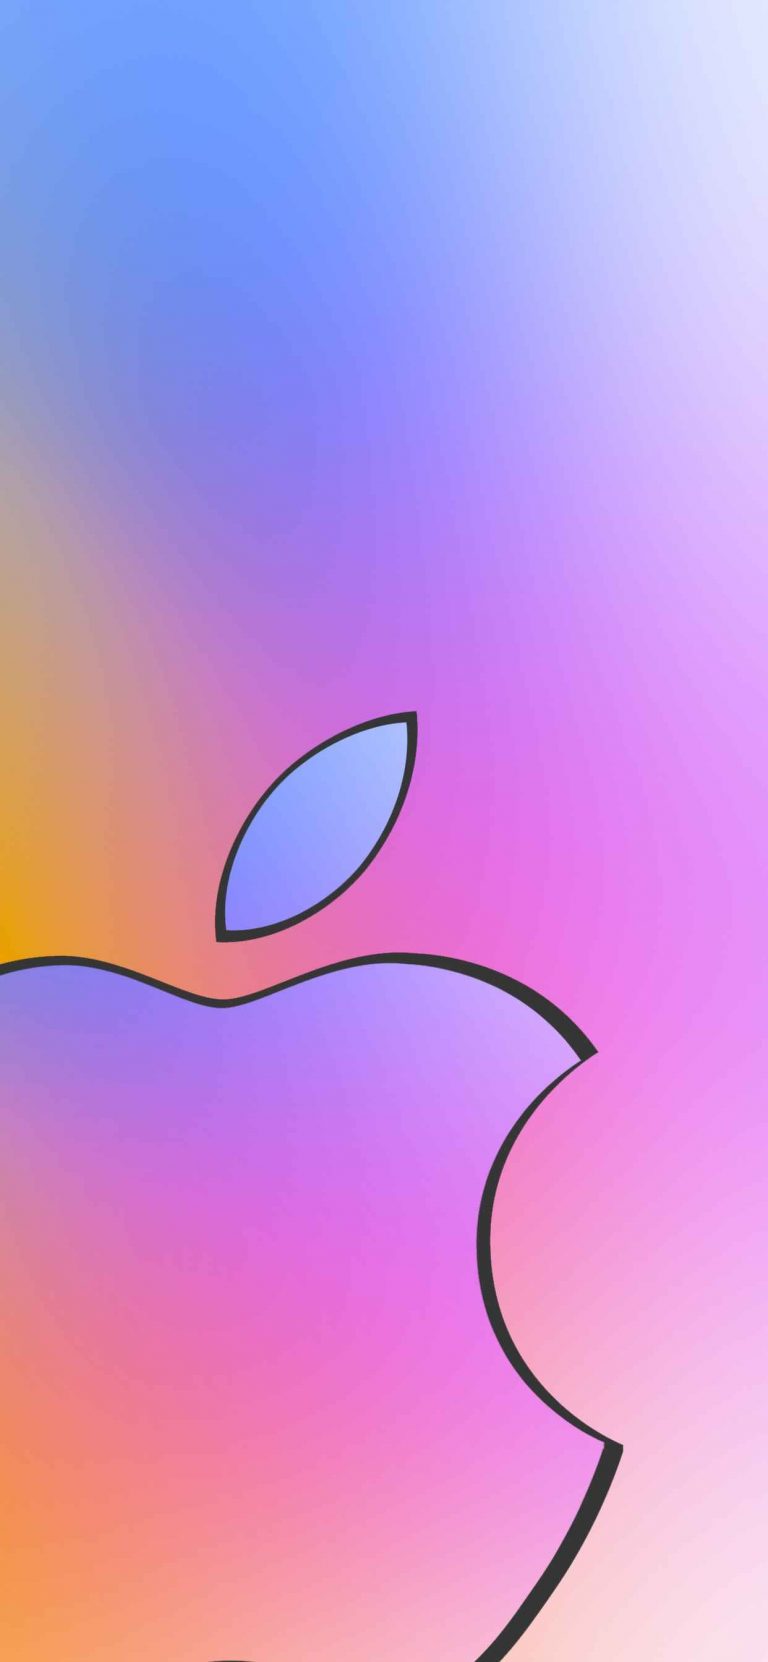 Apple Card Wallpapers [9 Wallpapers] - Download - DroidViews